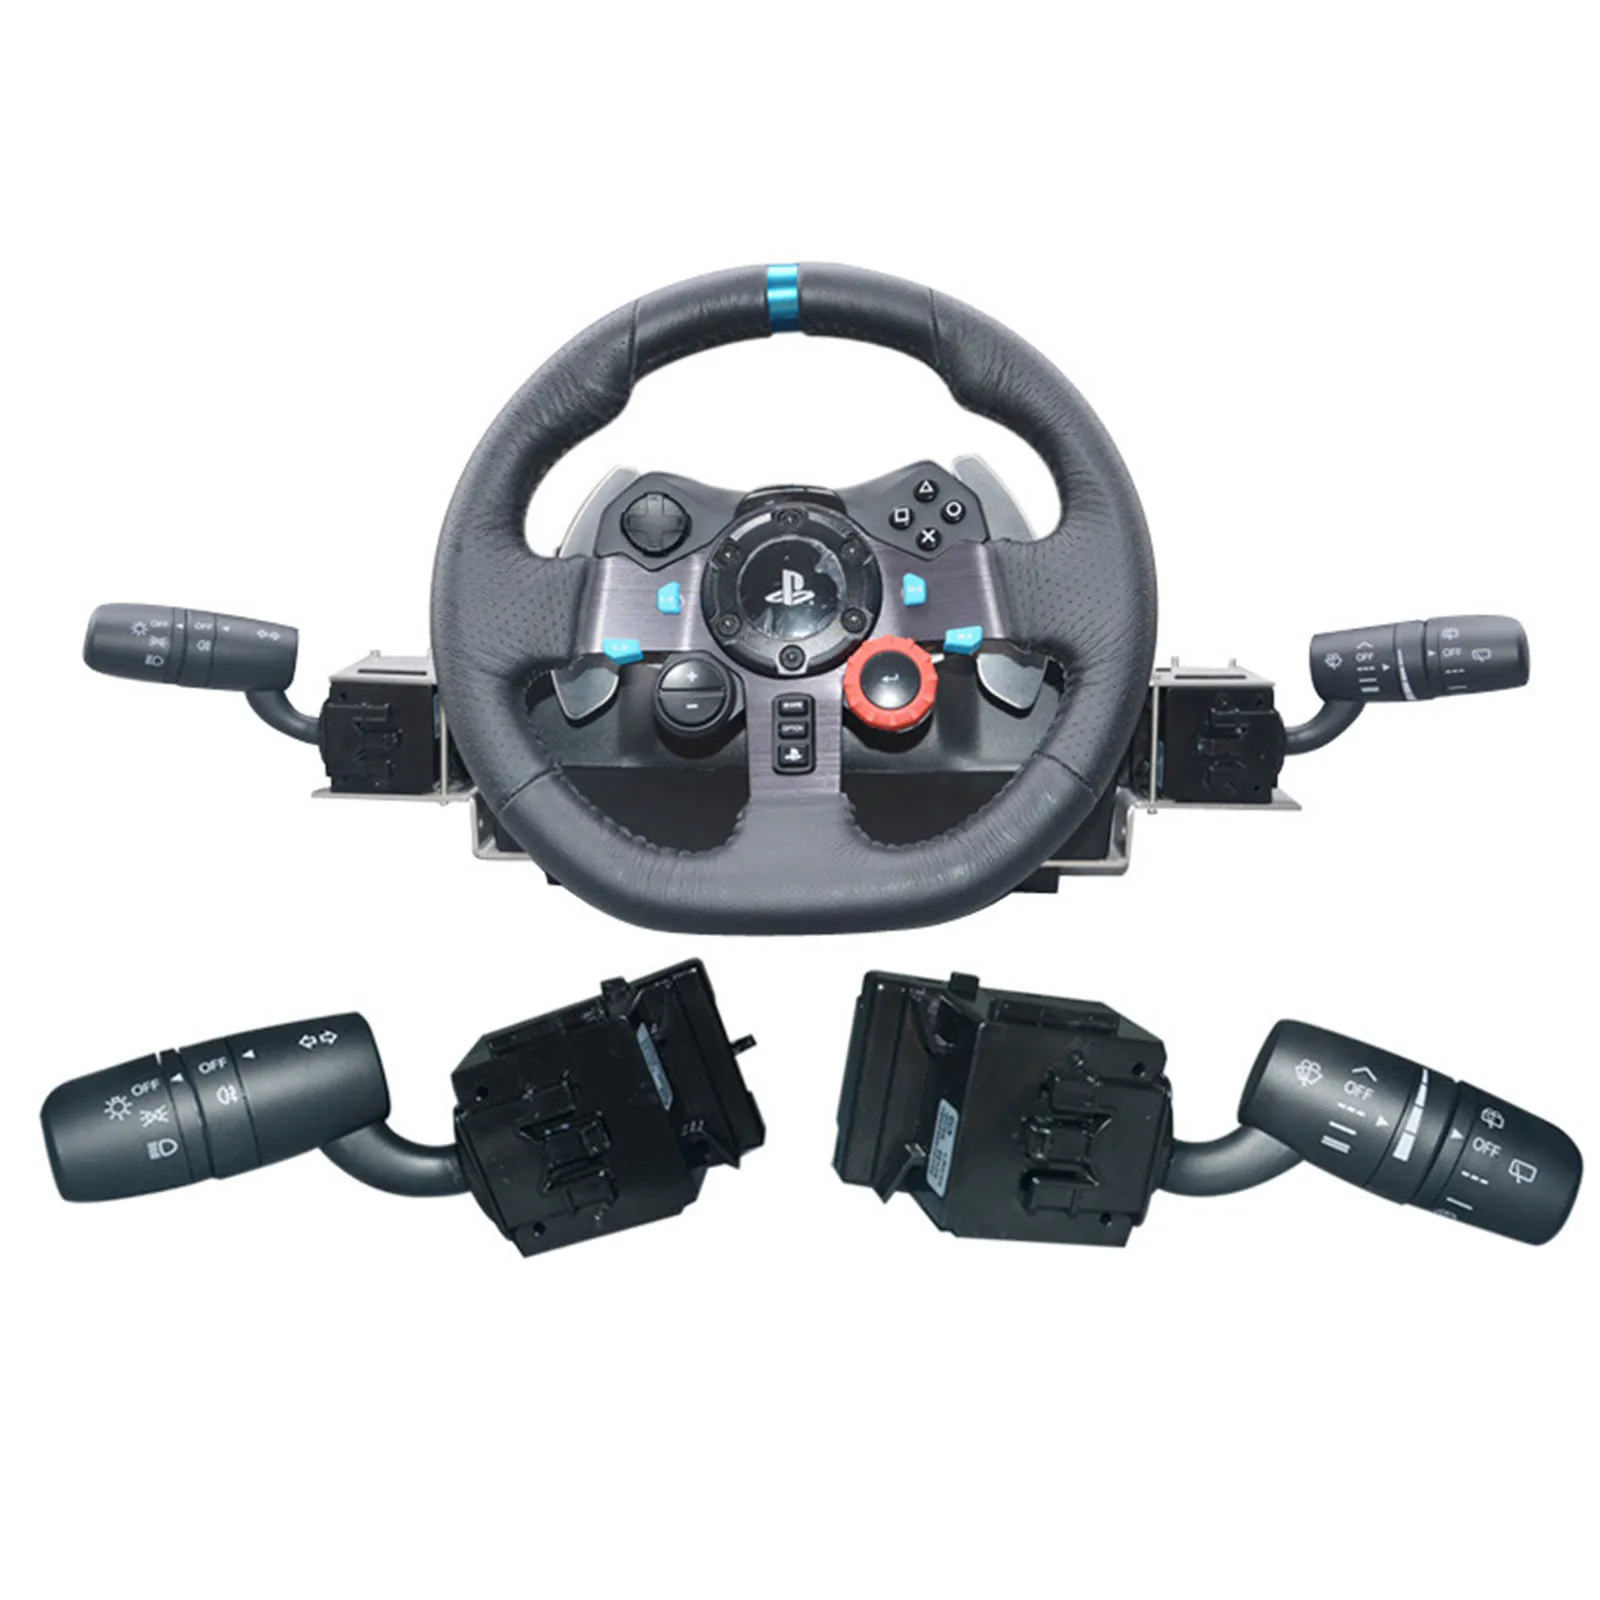 

Steering Wheel Turn Signal Headlight Wiper Switch Racing Simulator for Logitech G25 G29 G27 G920 T300RS SIMAGIC for ETS2 ATS